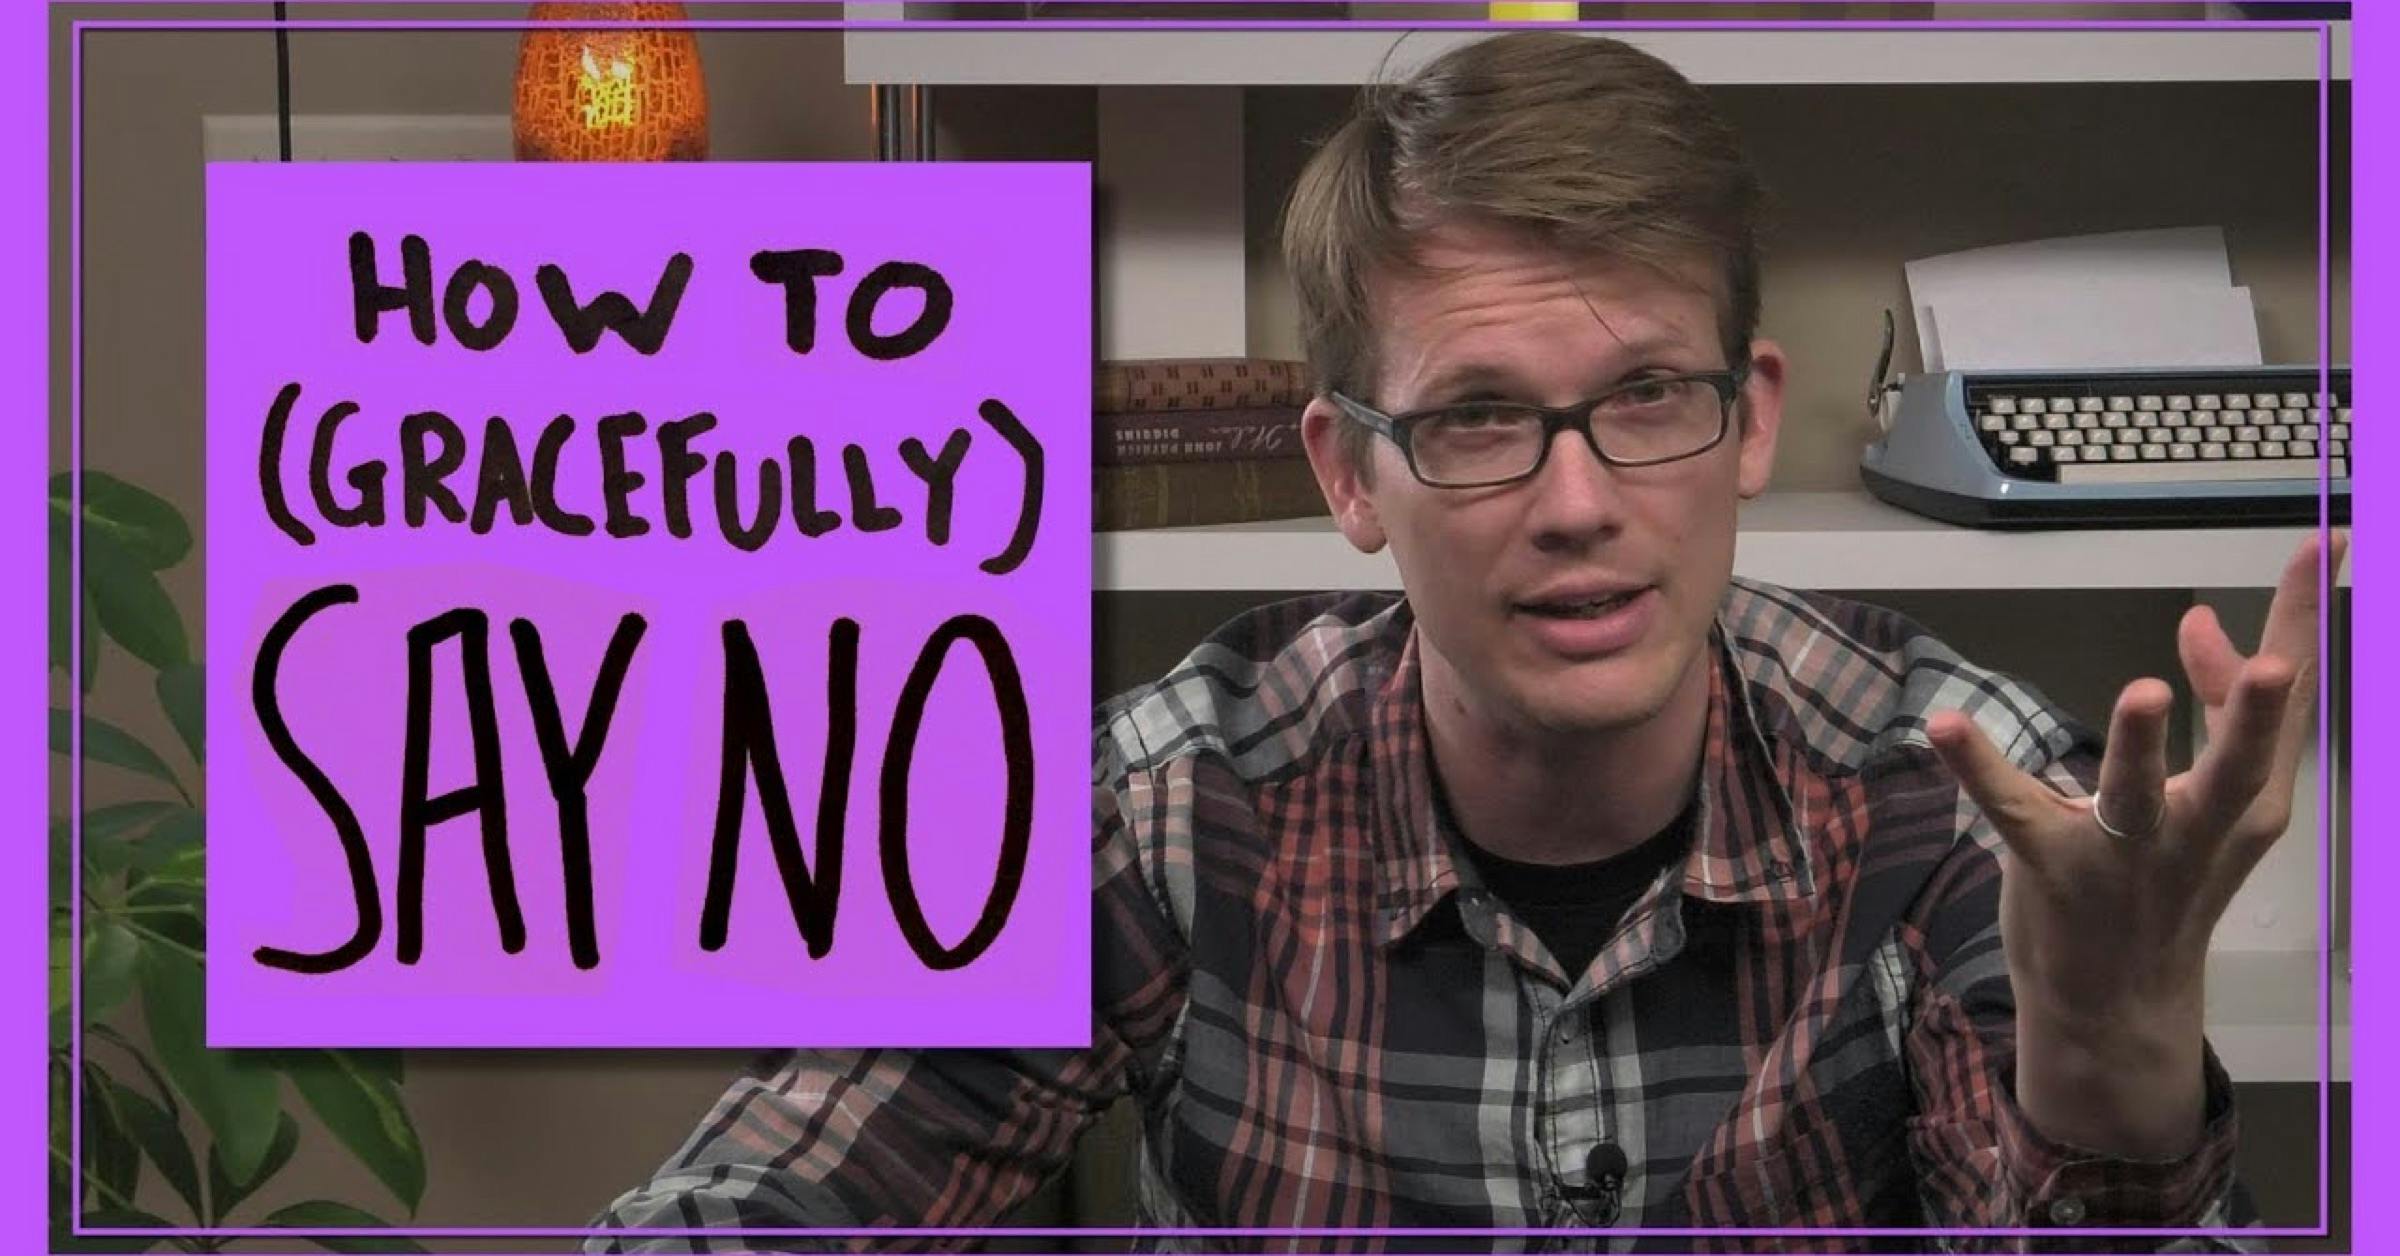 How to say no